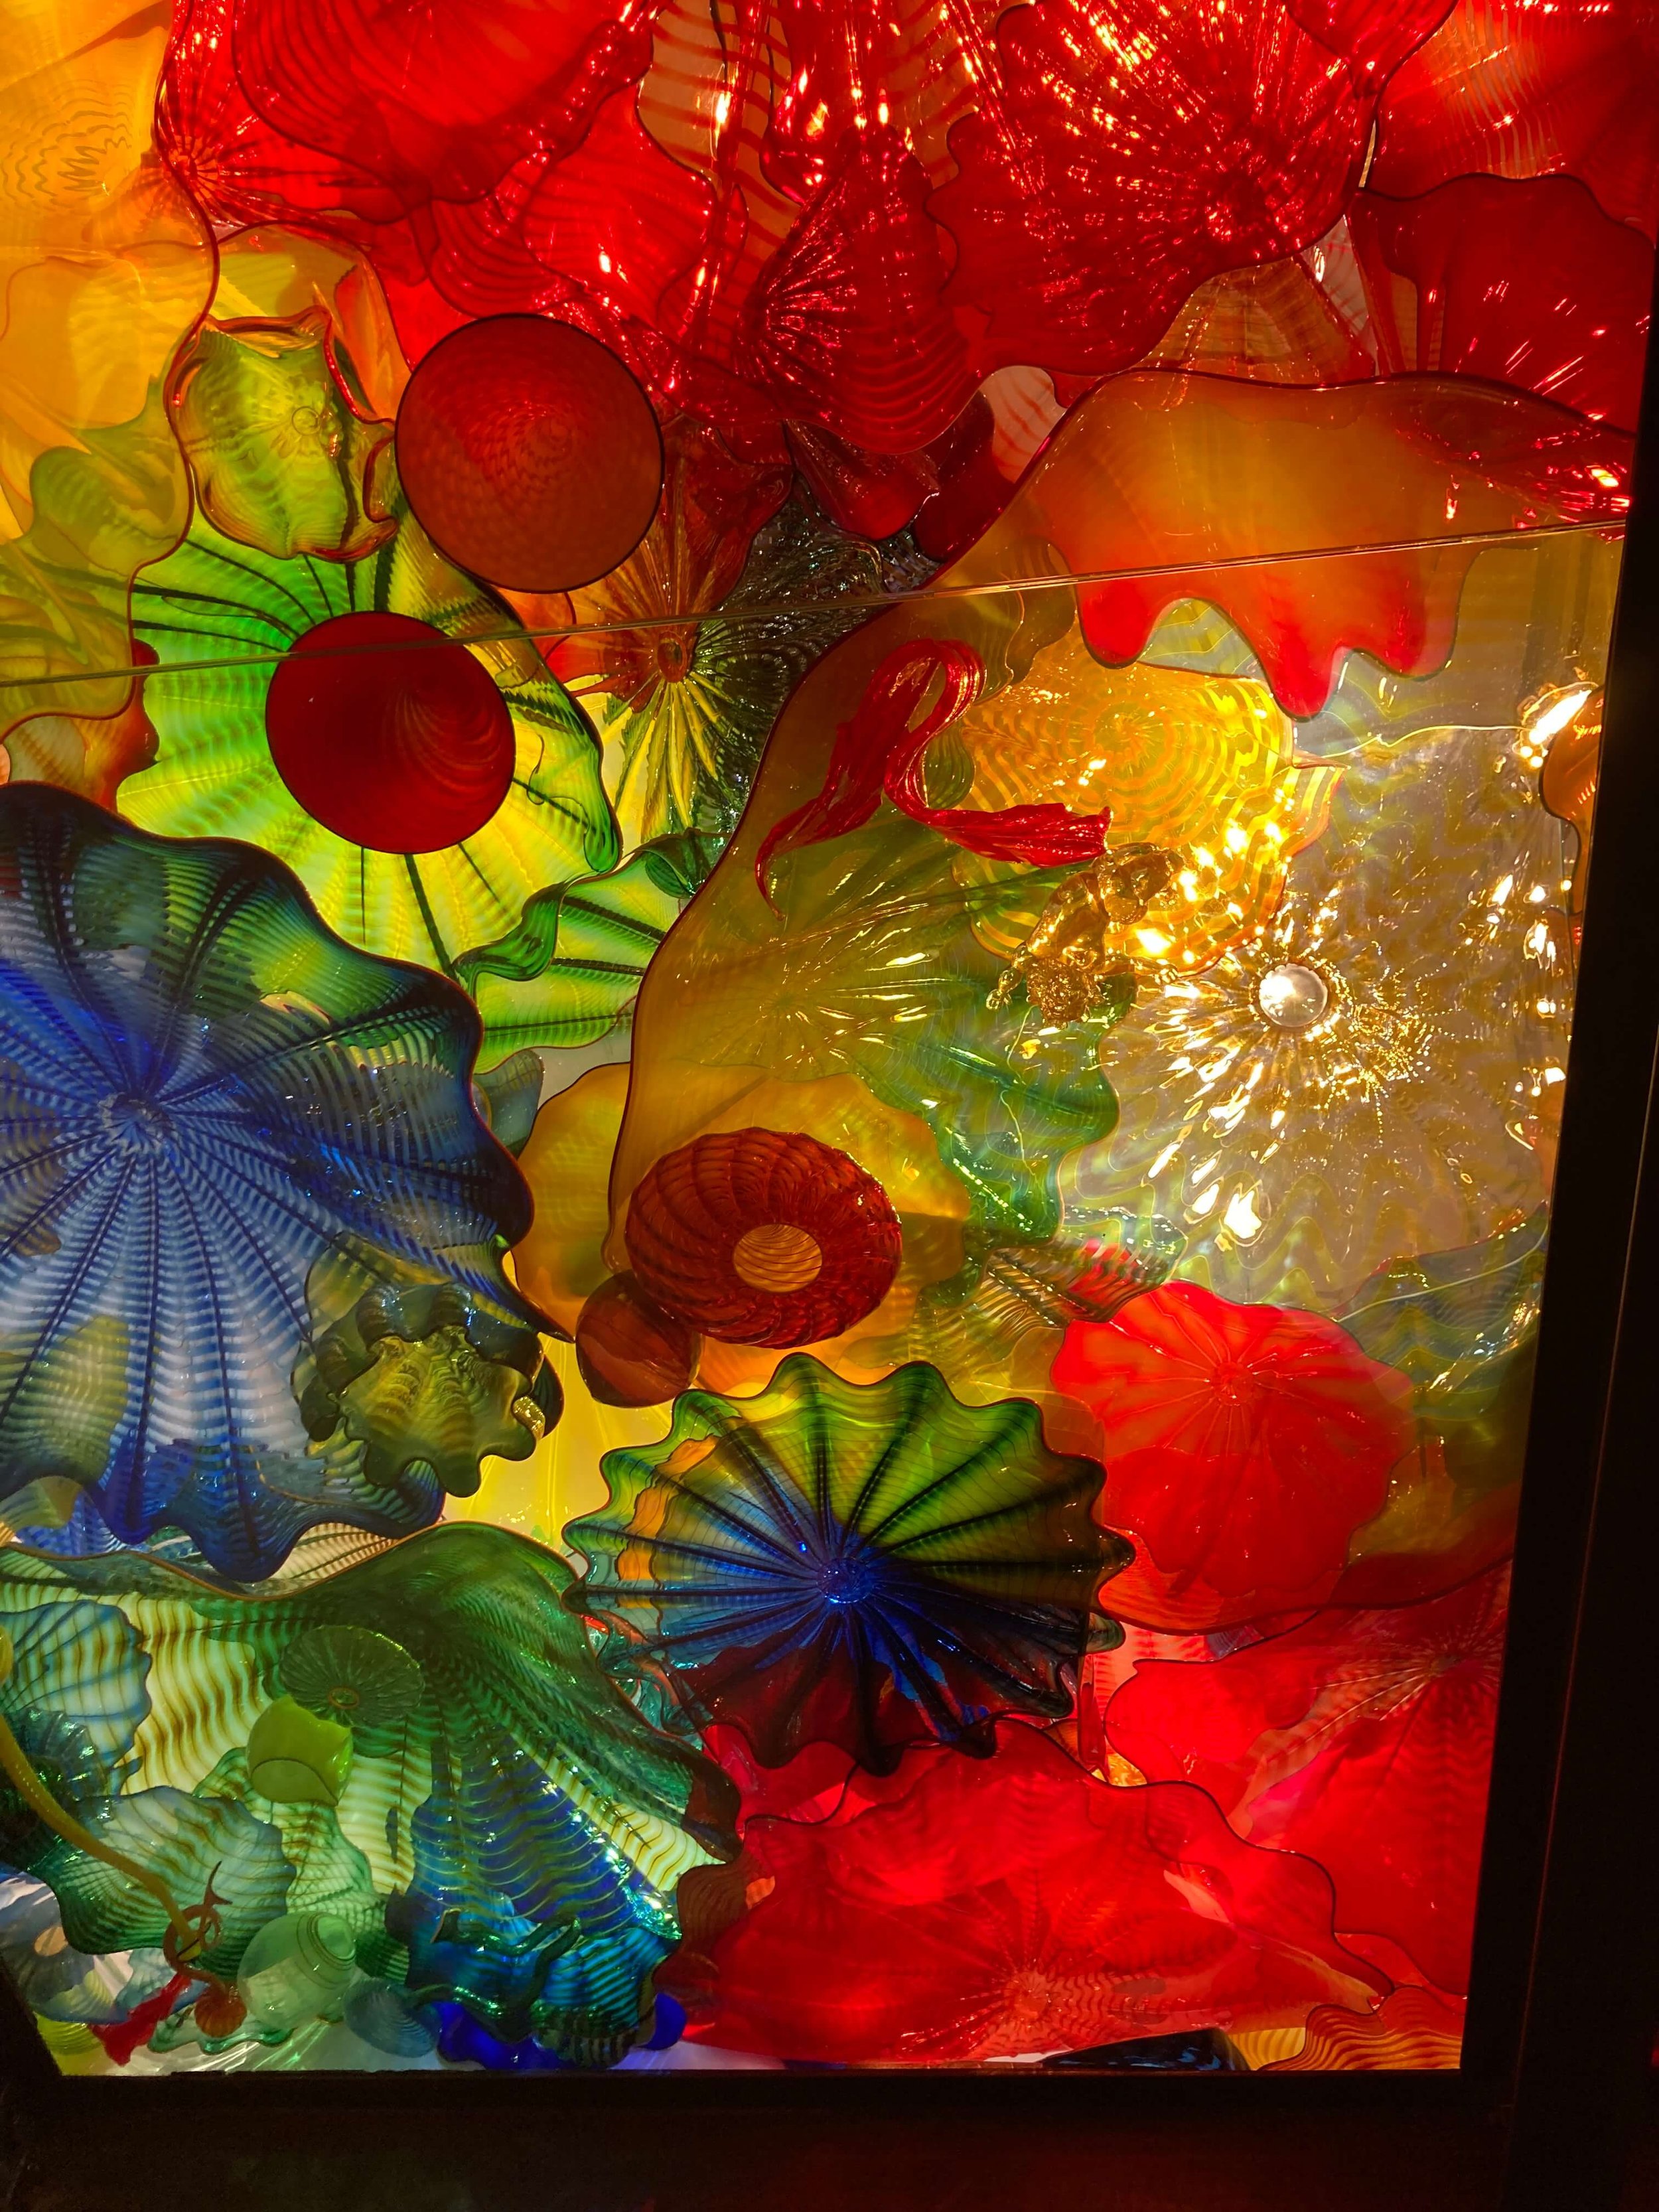 Dazzling Chihuly Glass in Ceiling Display